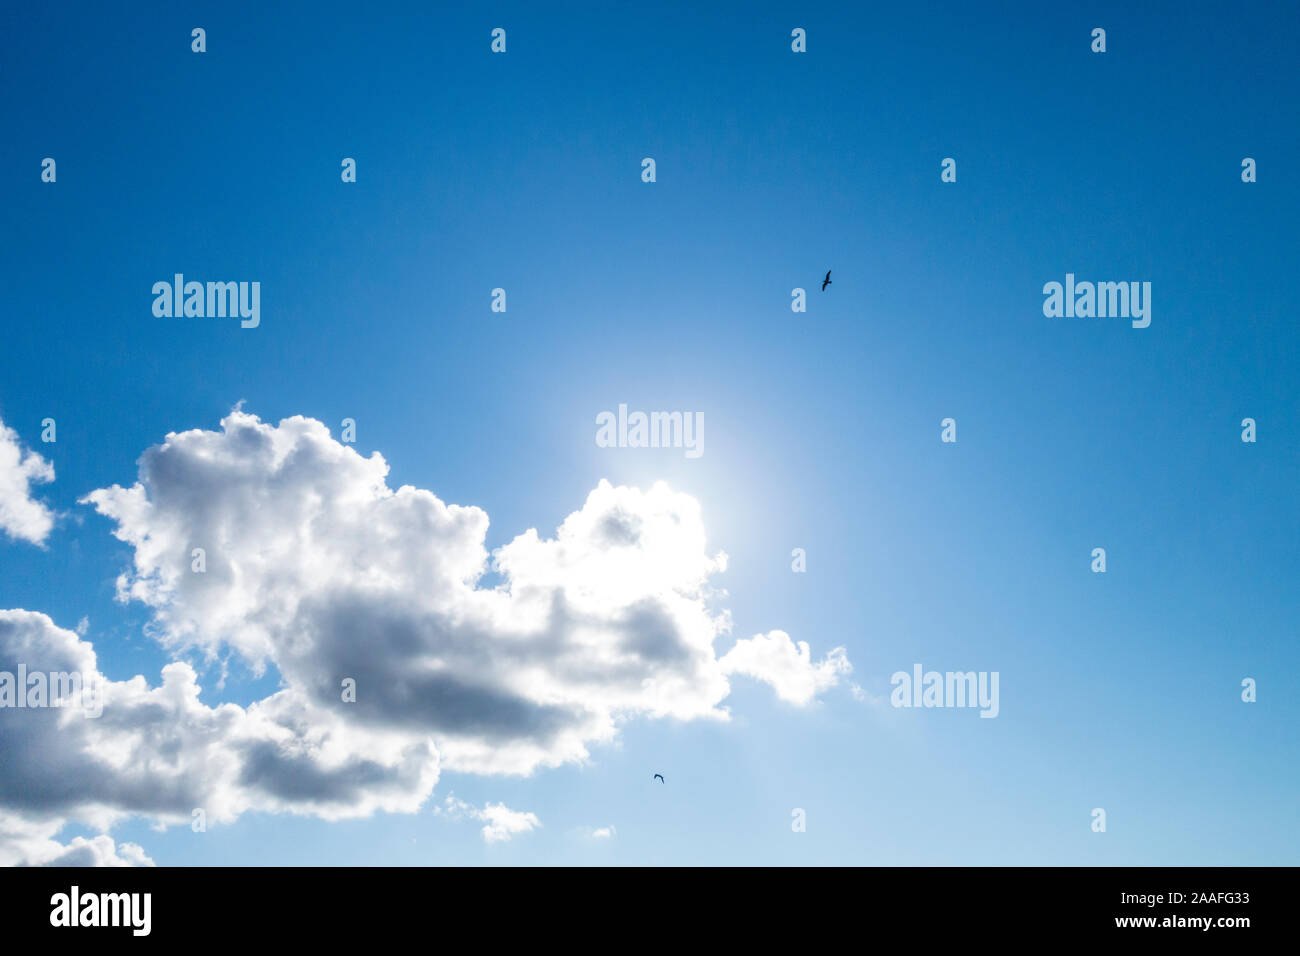 Birds circling overhead in a mostly blue sky with a few white puffy clouds. Stock Photo